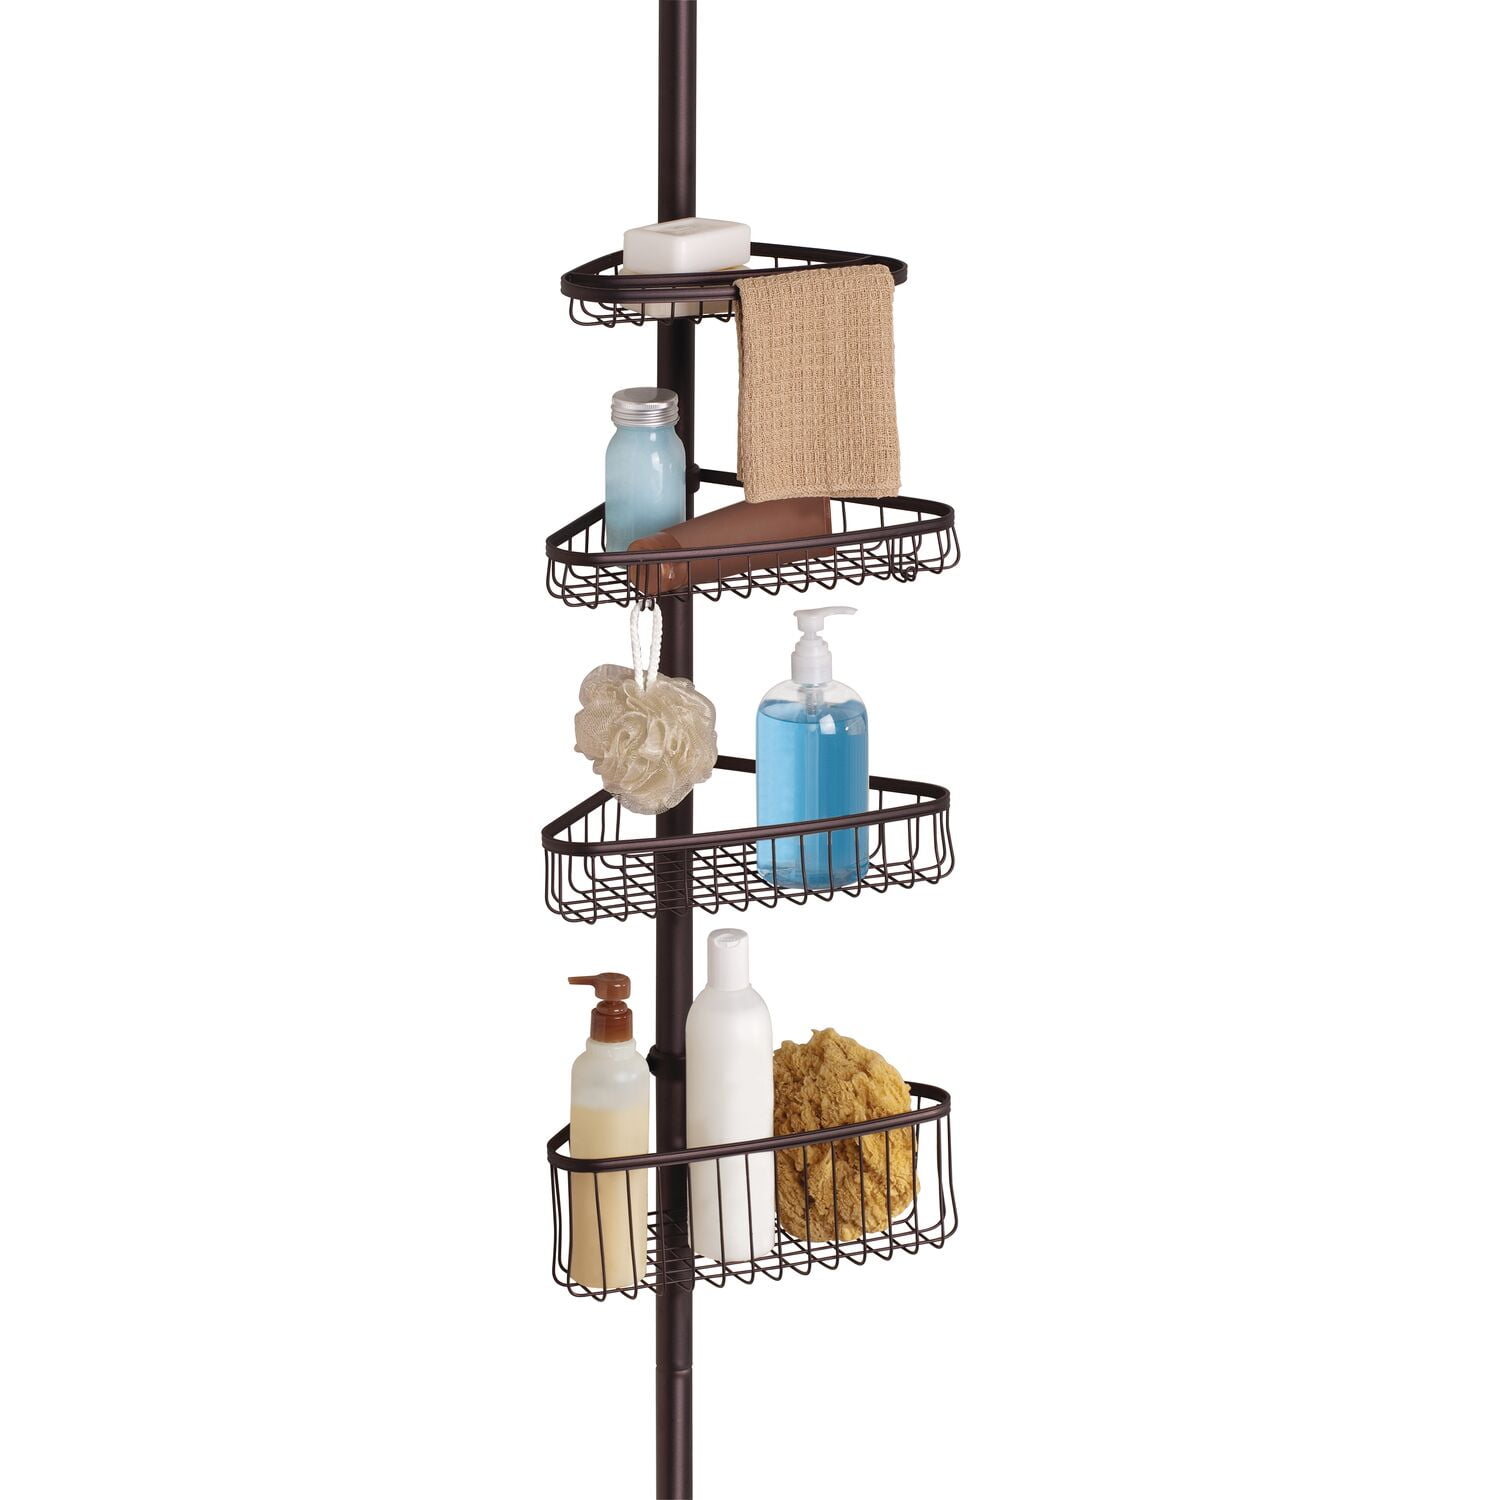 Standing shower caddy with mirror NEPTUNE